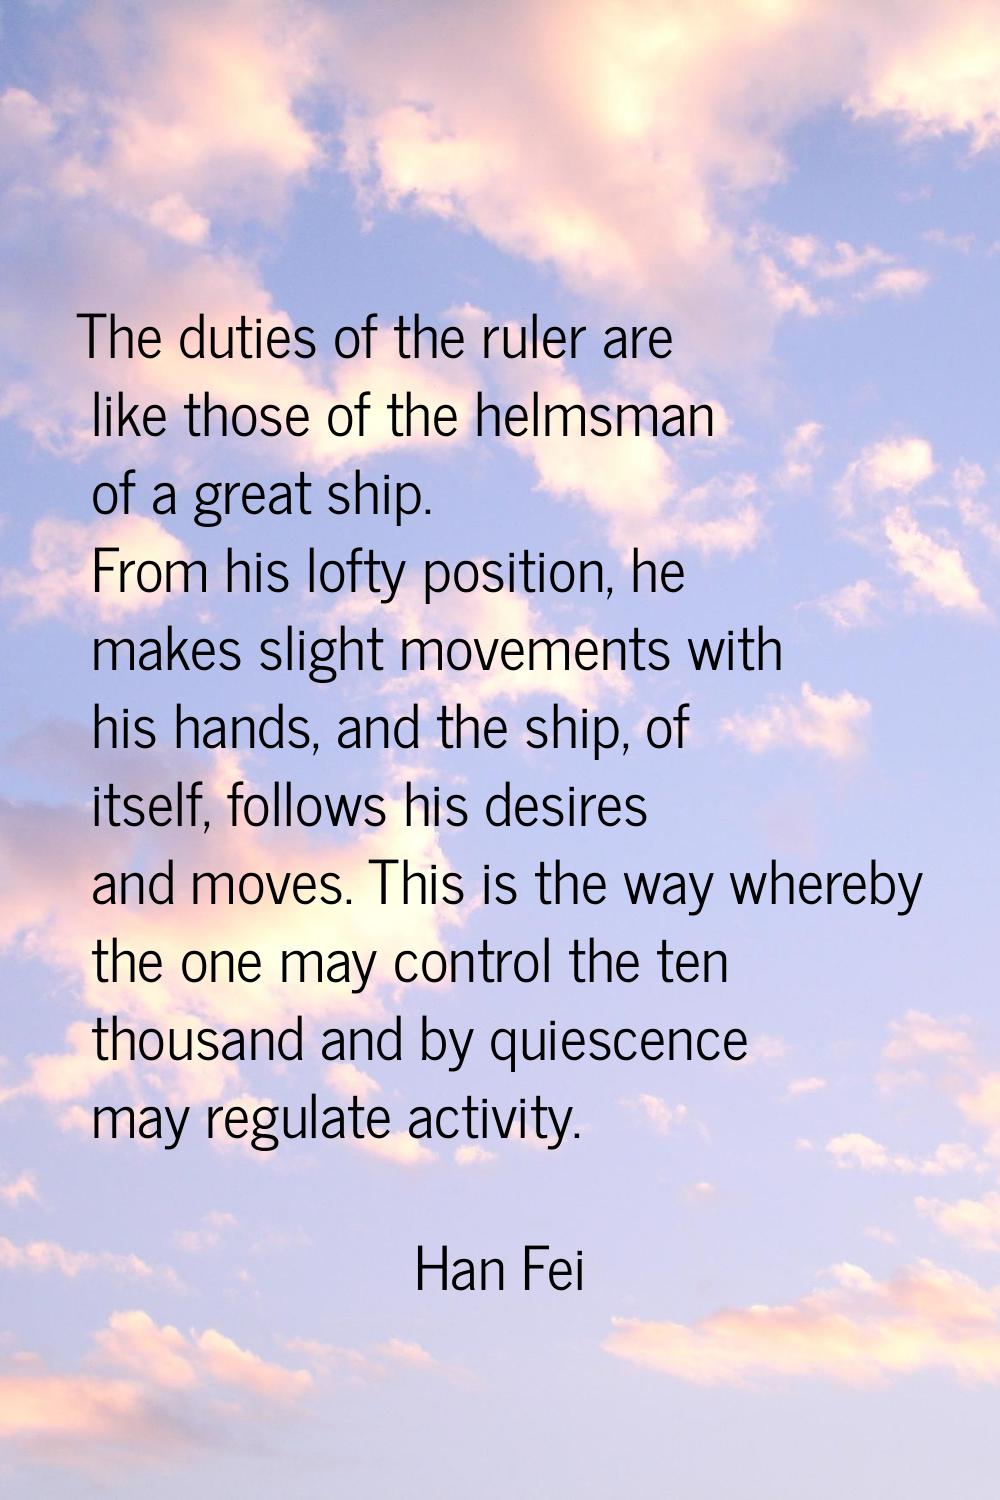 The duties of the ruler are like those of the helmsman of a great ship. From his lofty position, he